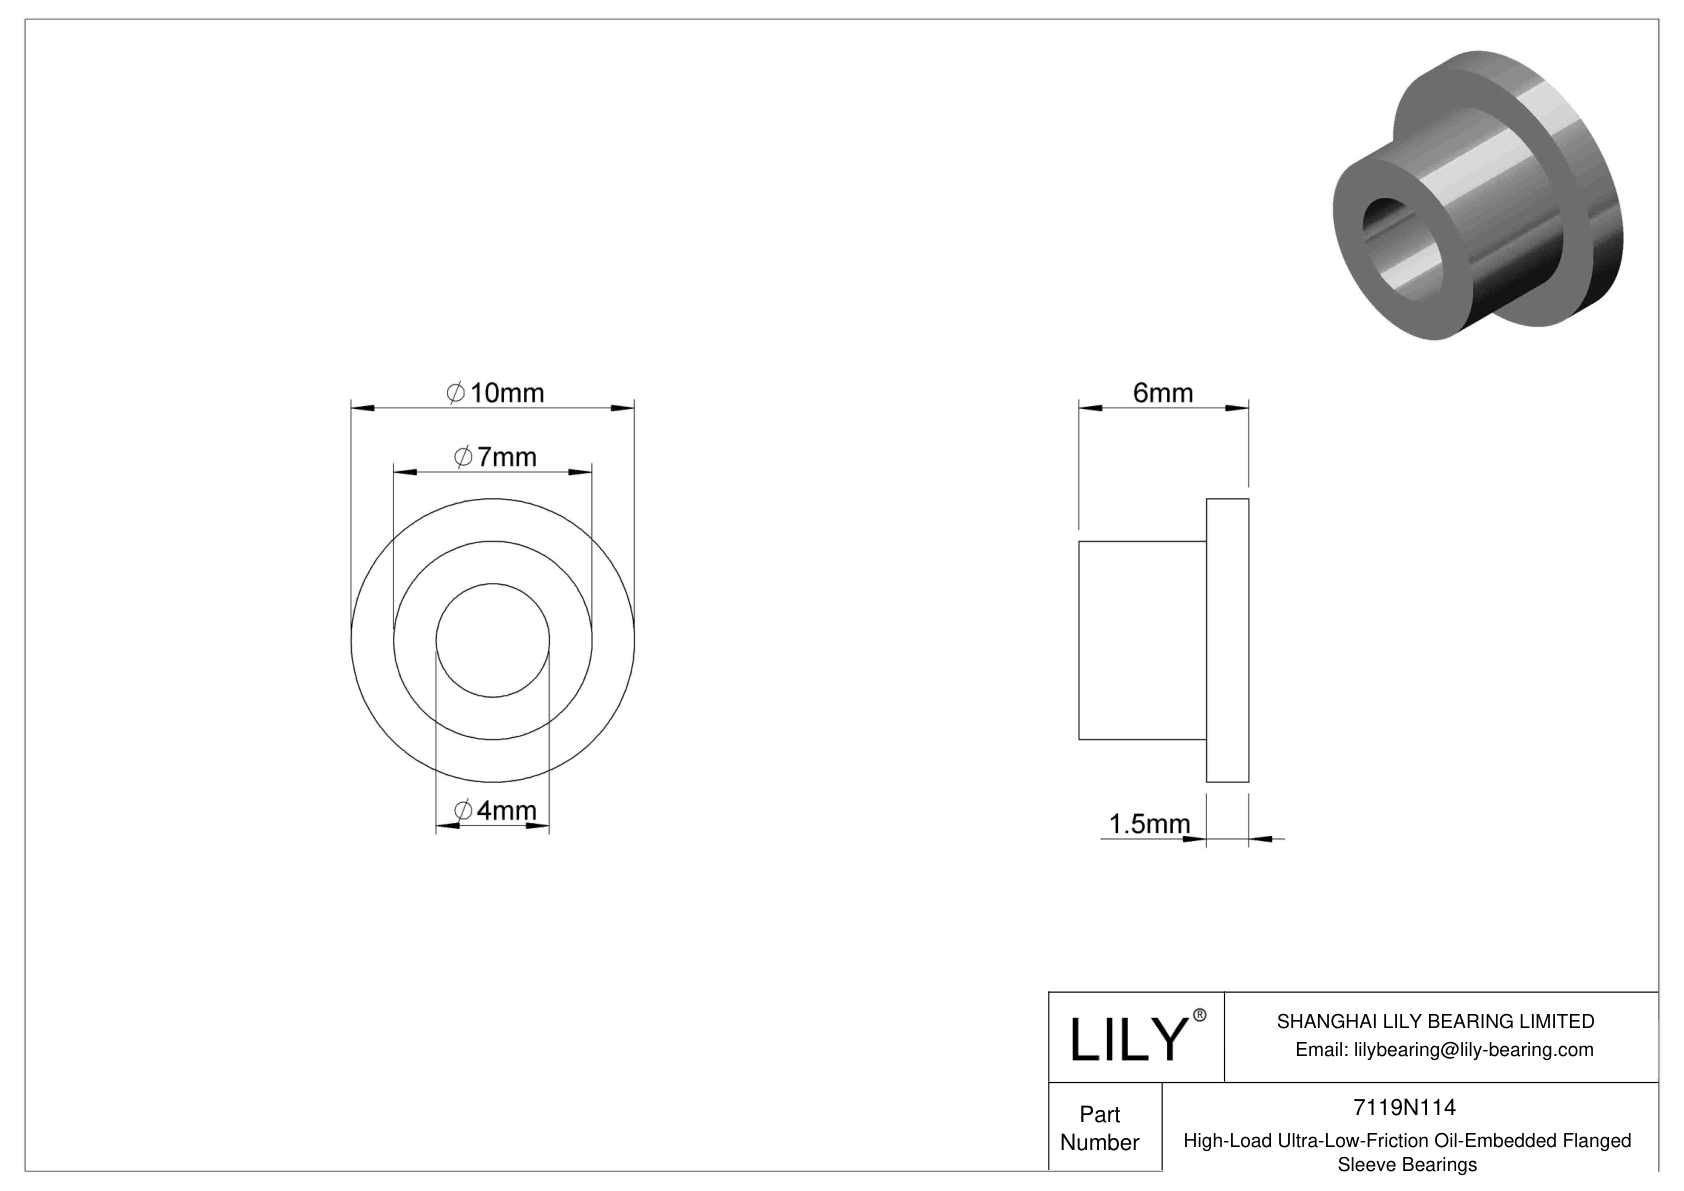 HBBJNBBE High-Load Ultra-Low-Friction Oil-Embedded Flanged Sleeve Bearings cad drawing